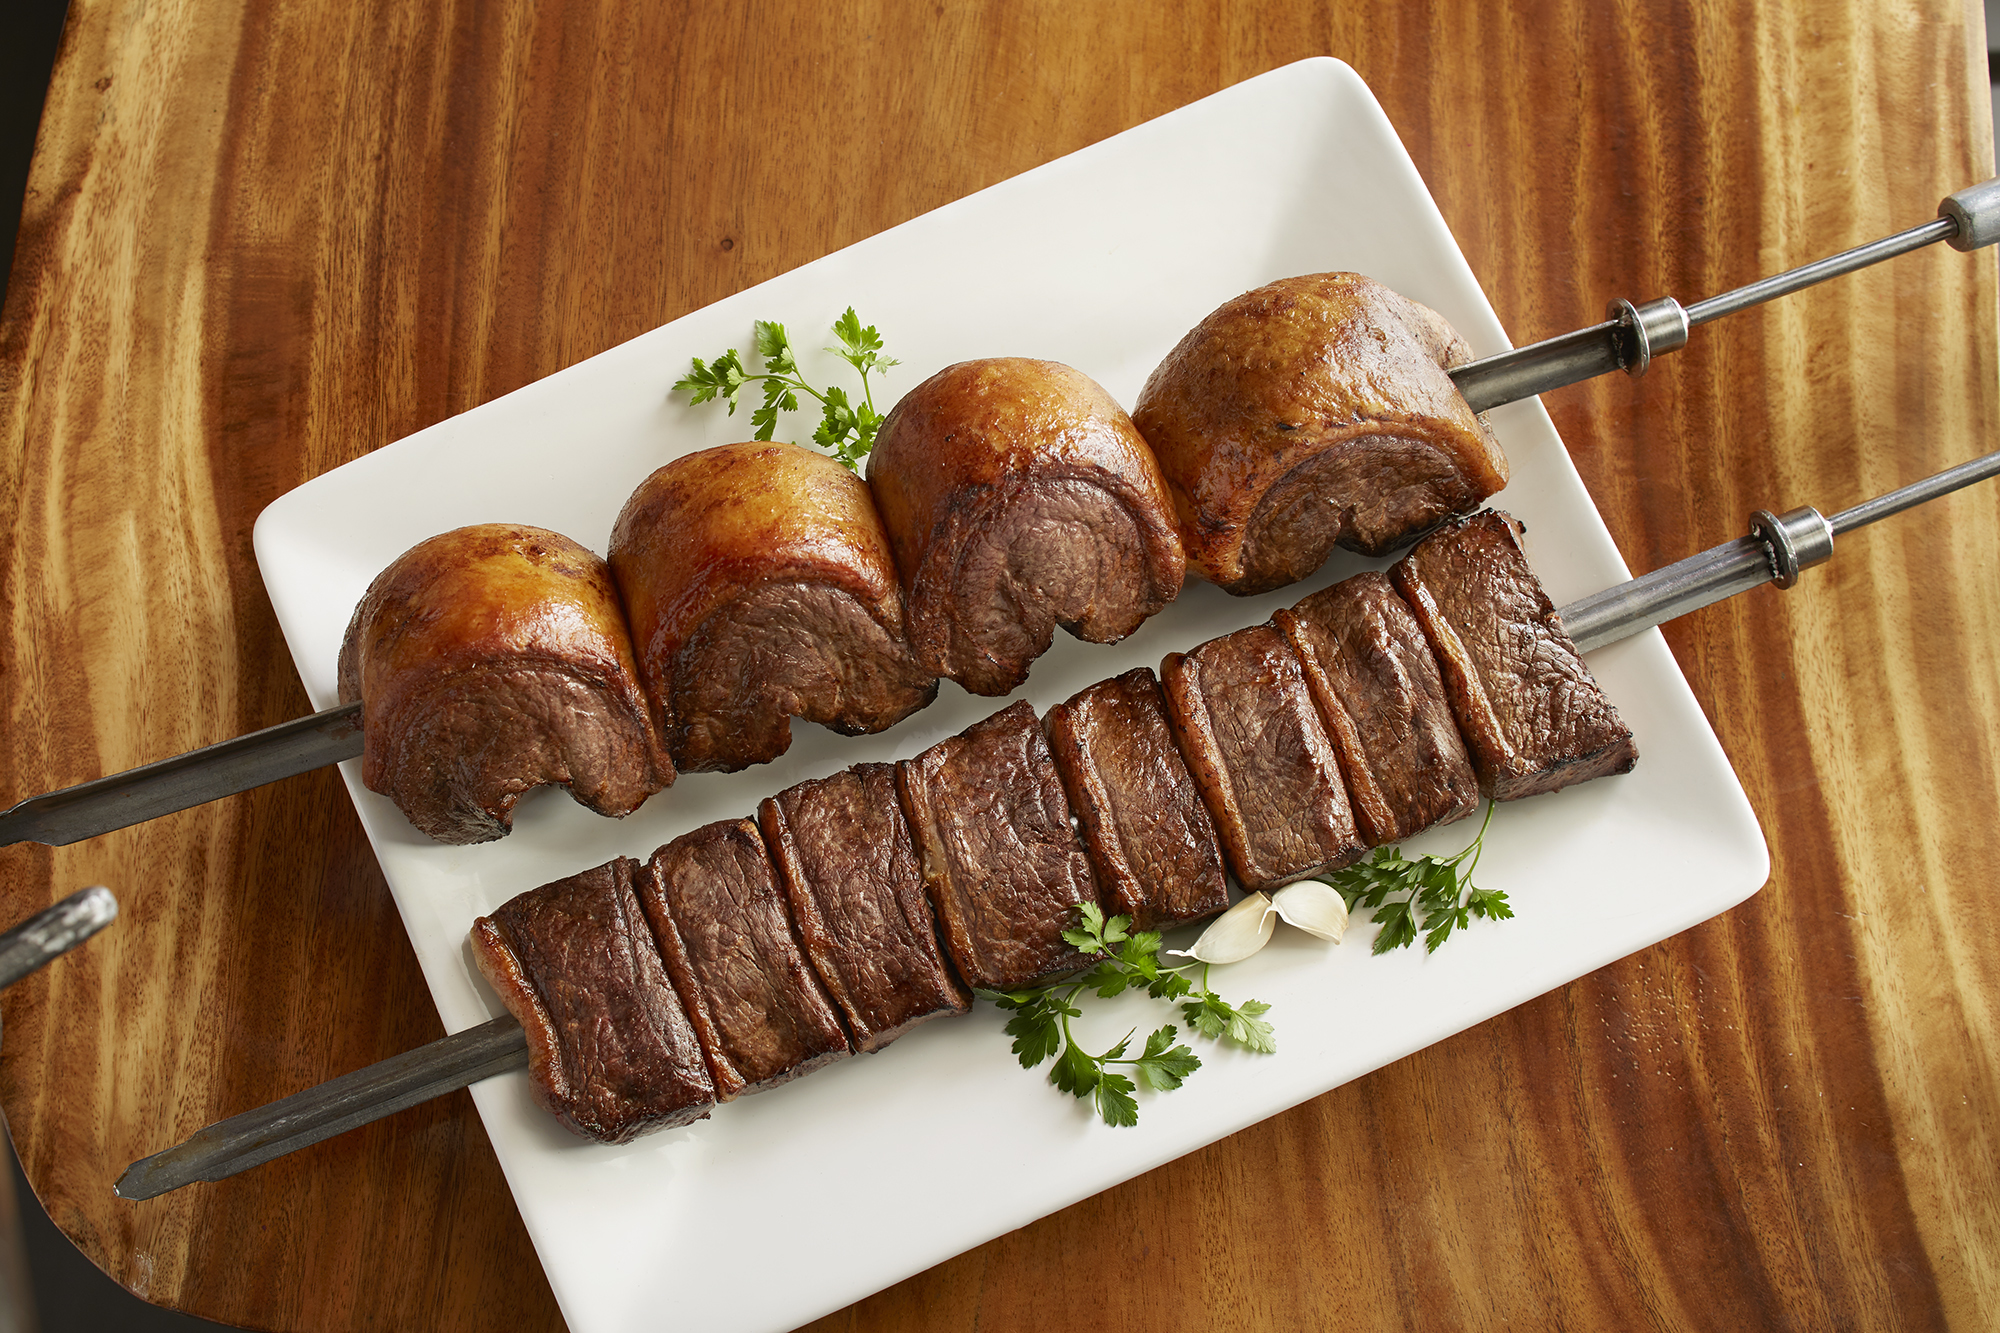 Texas de Brazil offers a variety of meats including beef, lamb, pork, chicken and Brazilian sausage